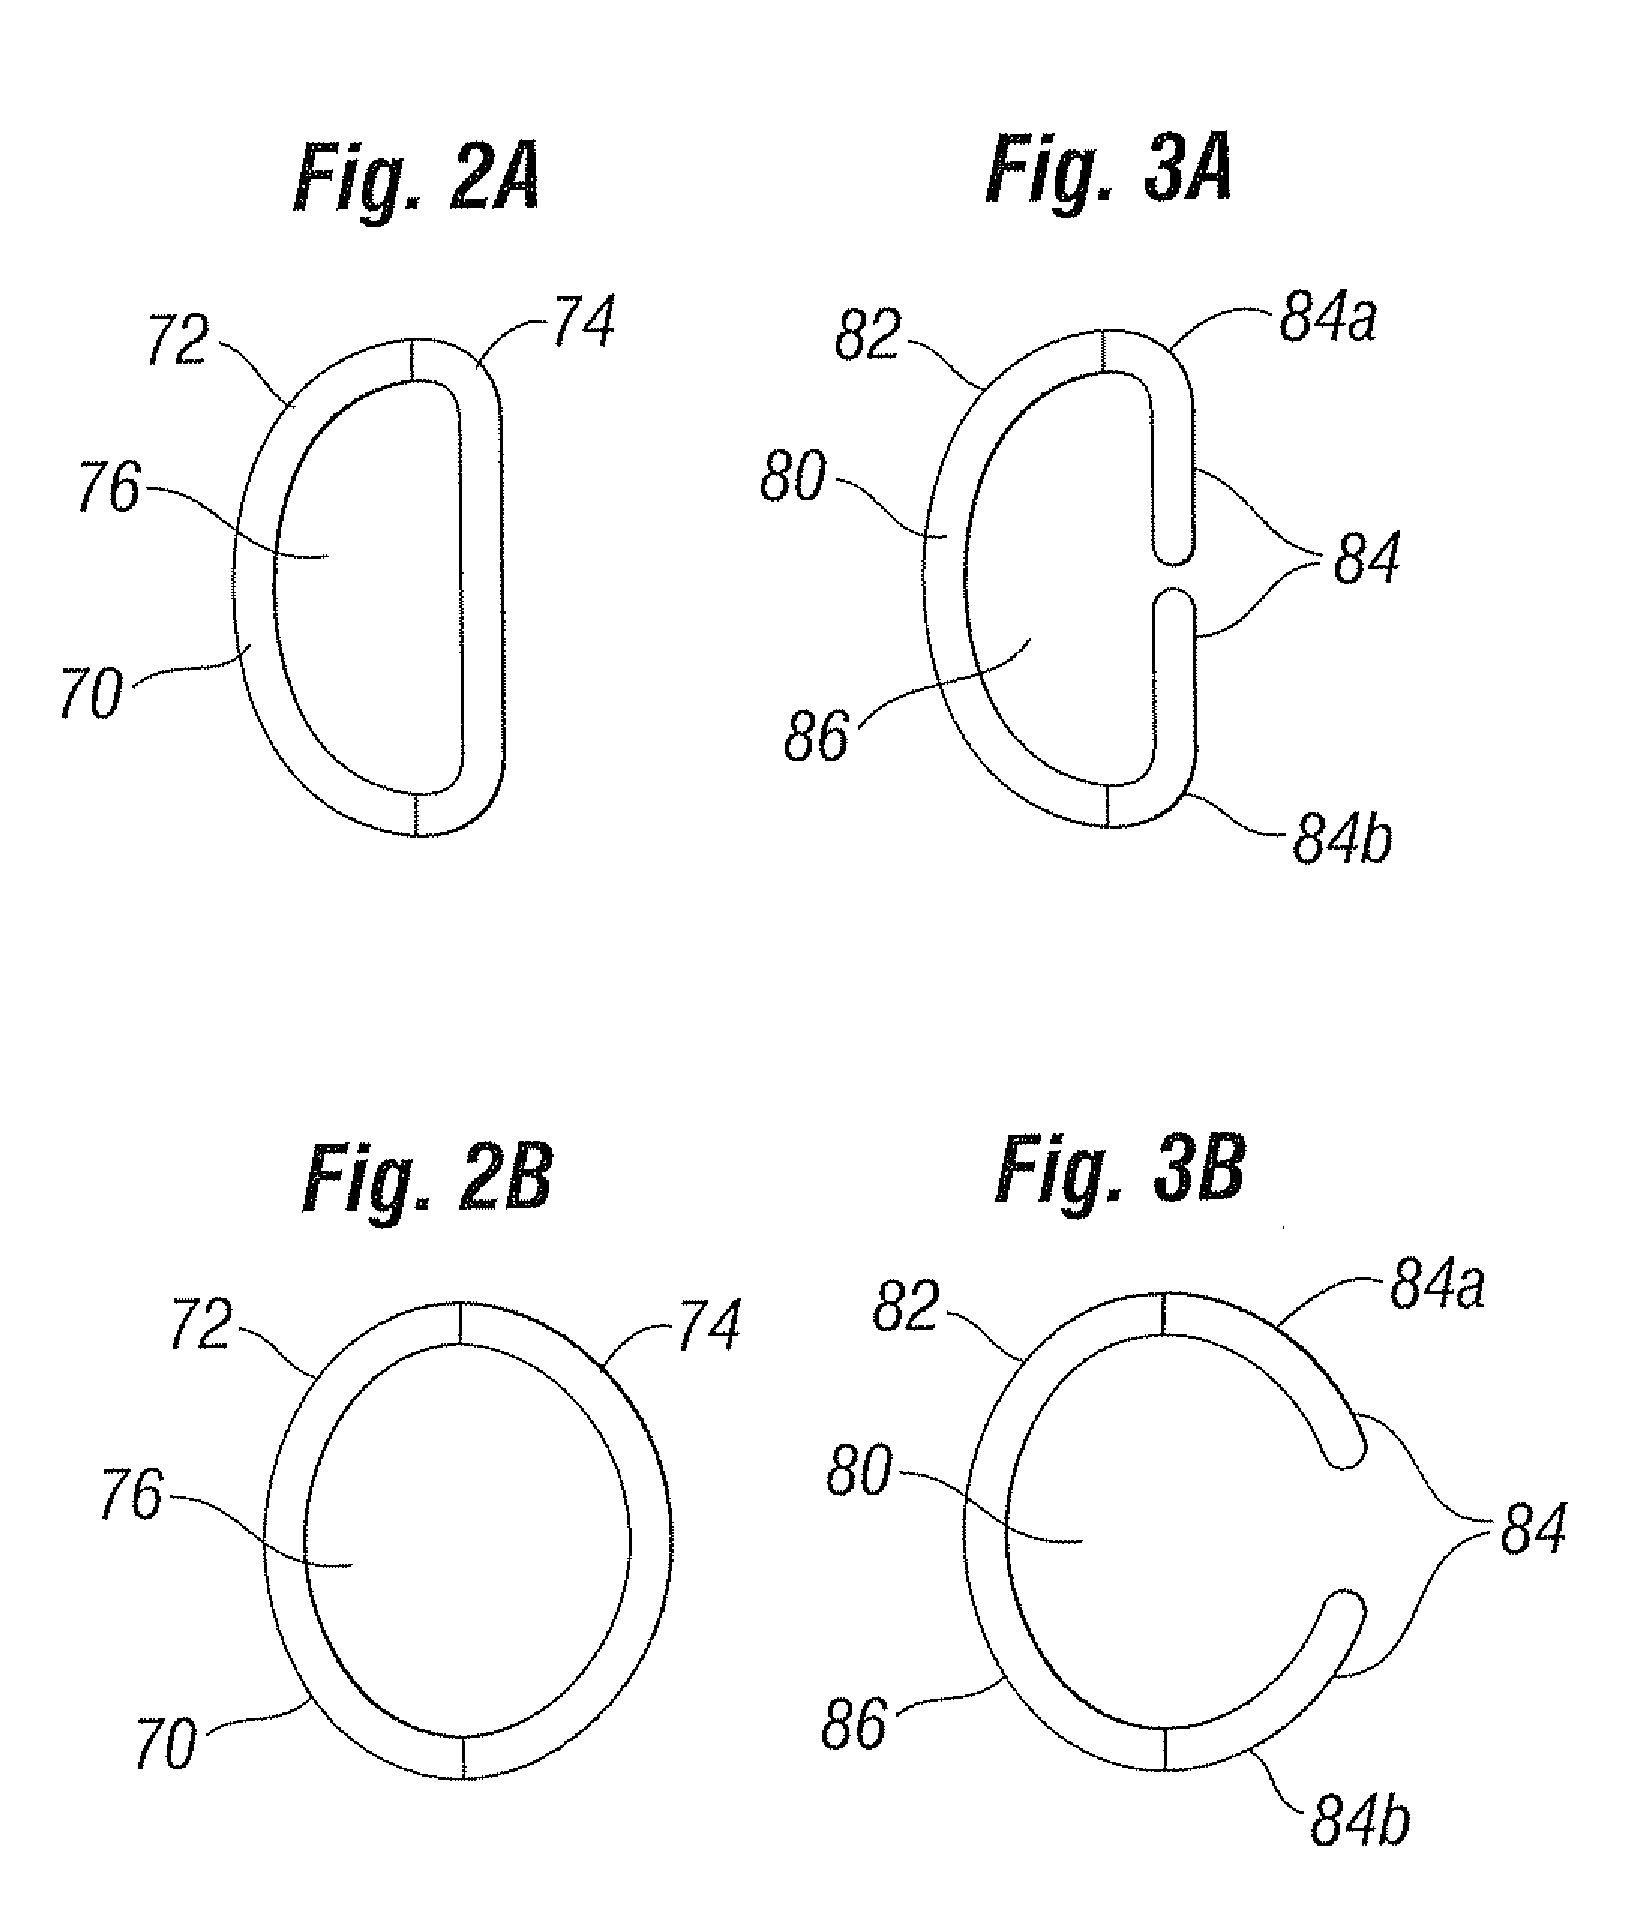 Annuloplasty Ring Configured to Receive a Percutaneous Prosthetic Heart Valve Implantation